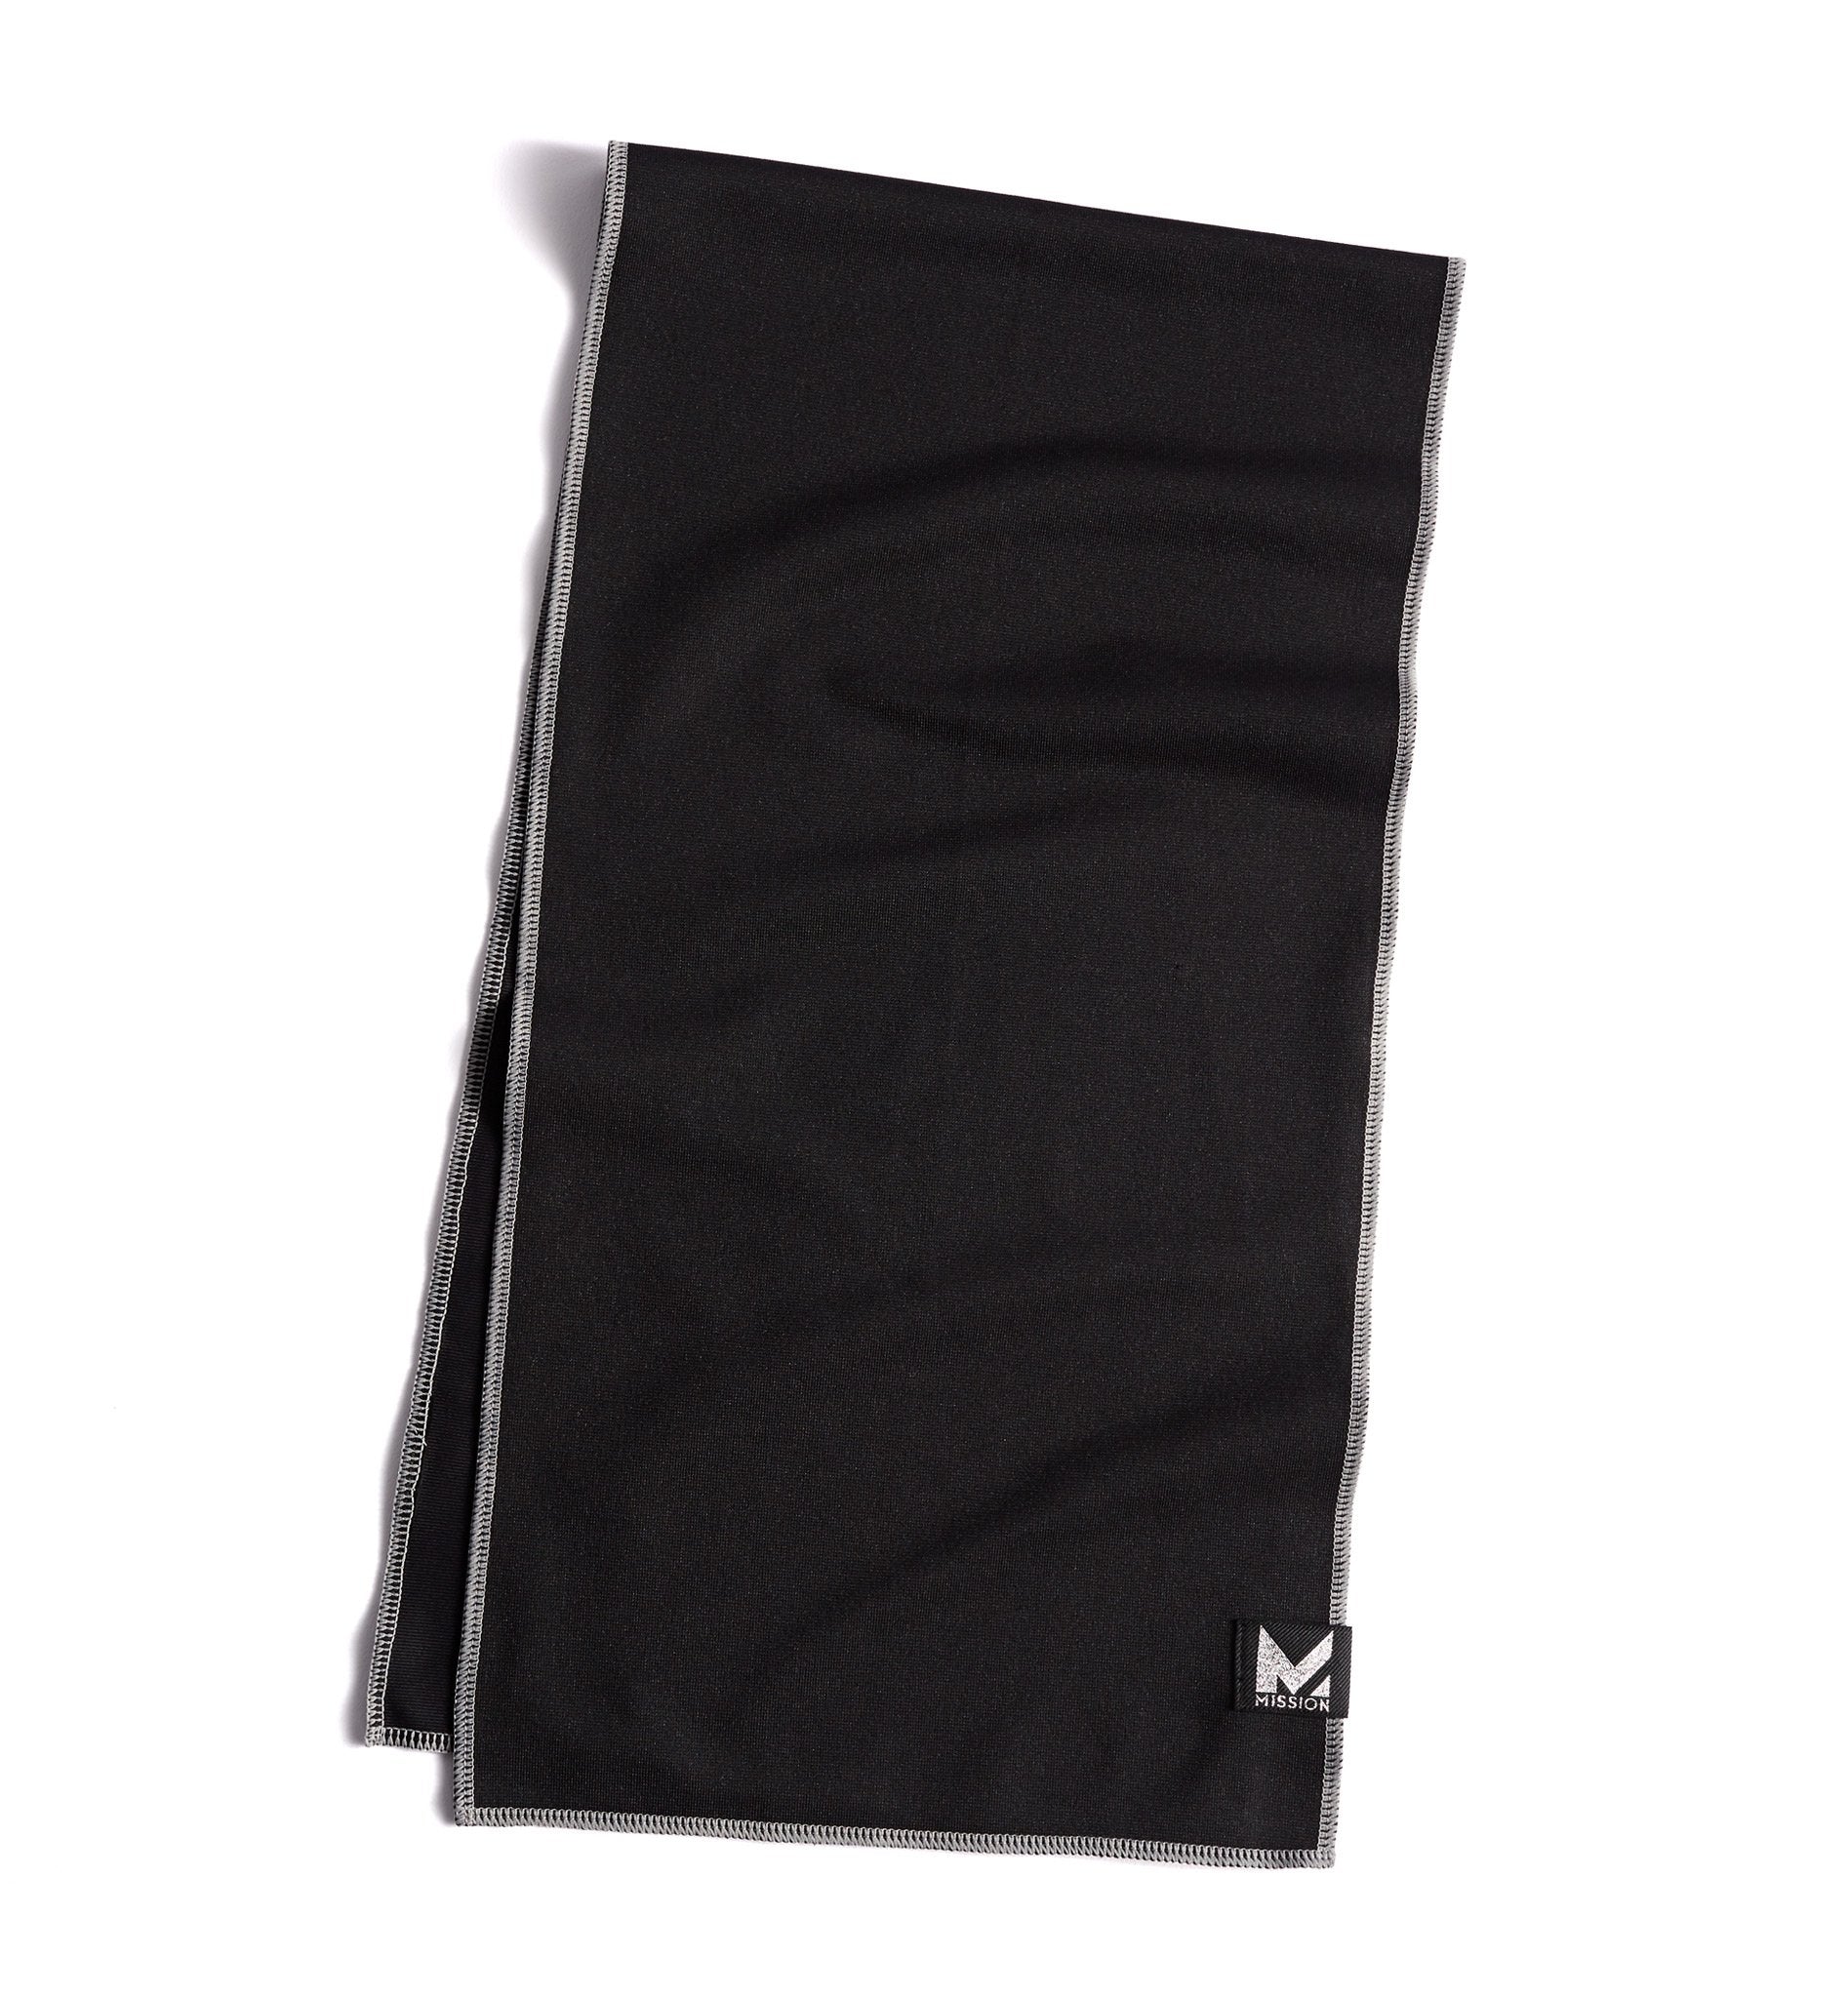 Max Plus Cooling Towel Towels MISSION One Size Black / Silver 